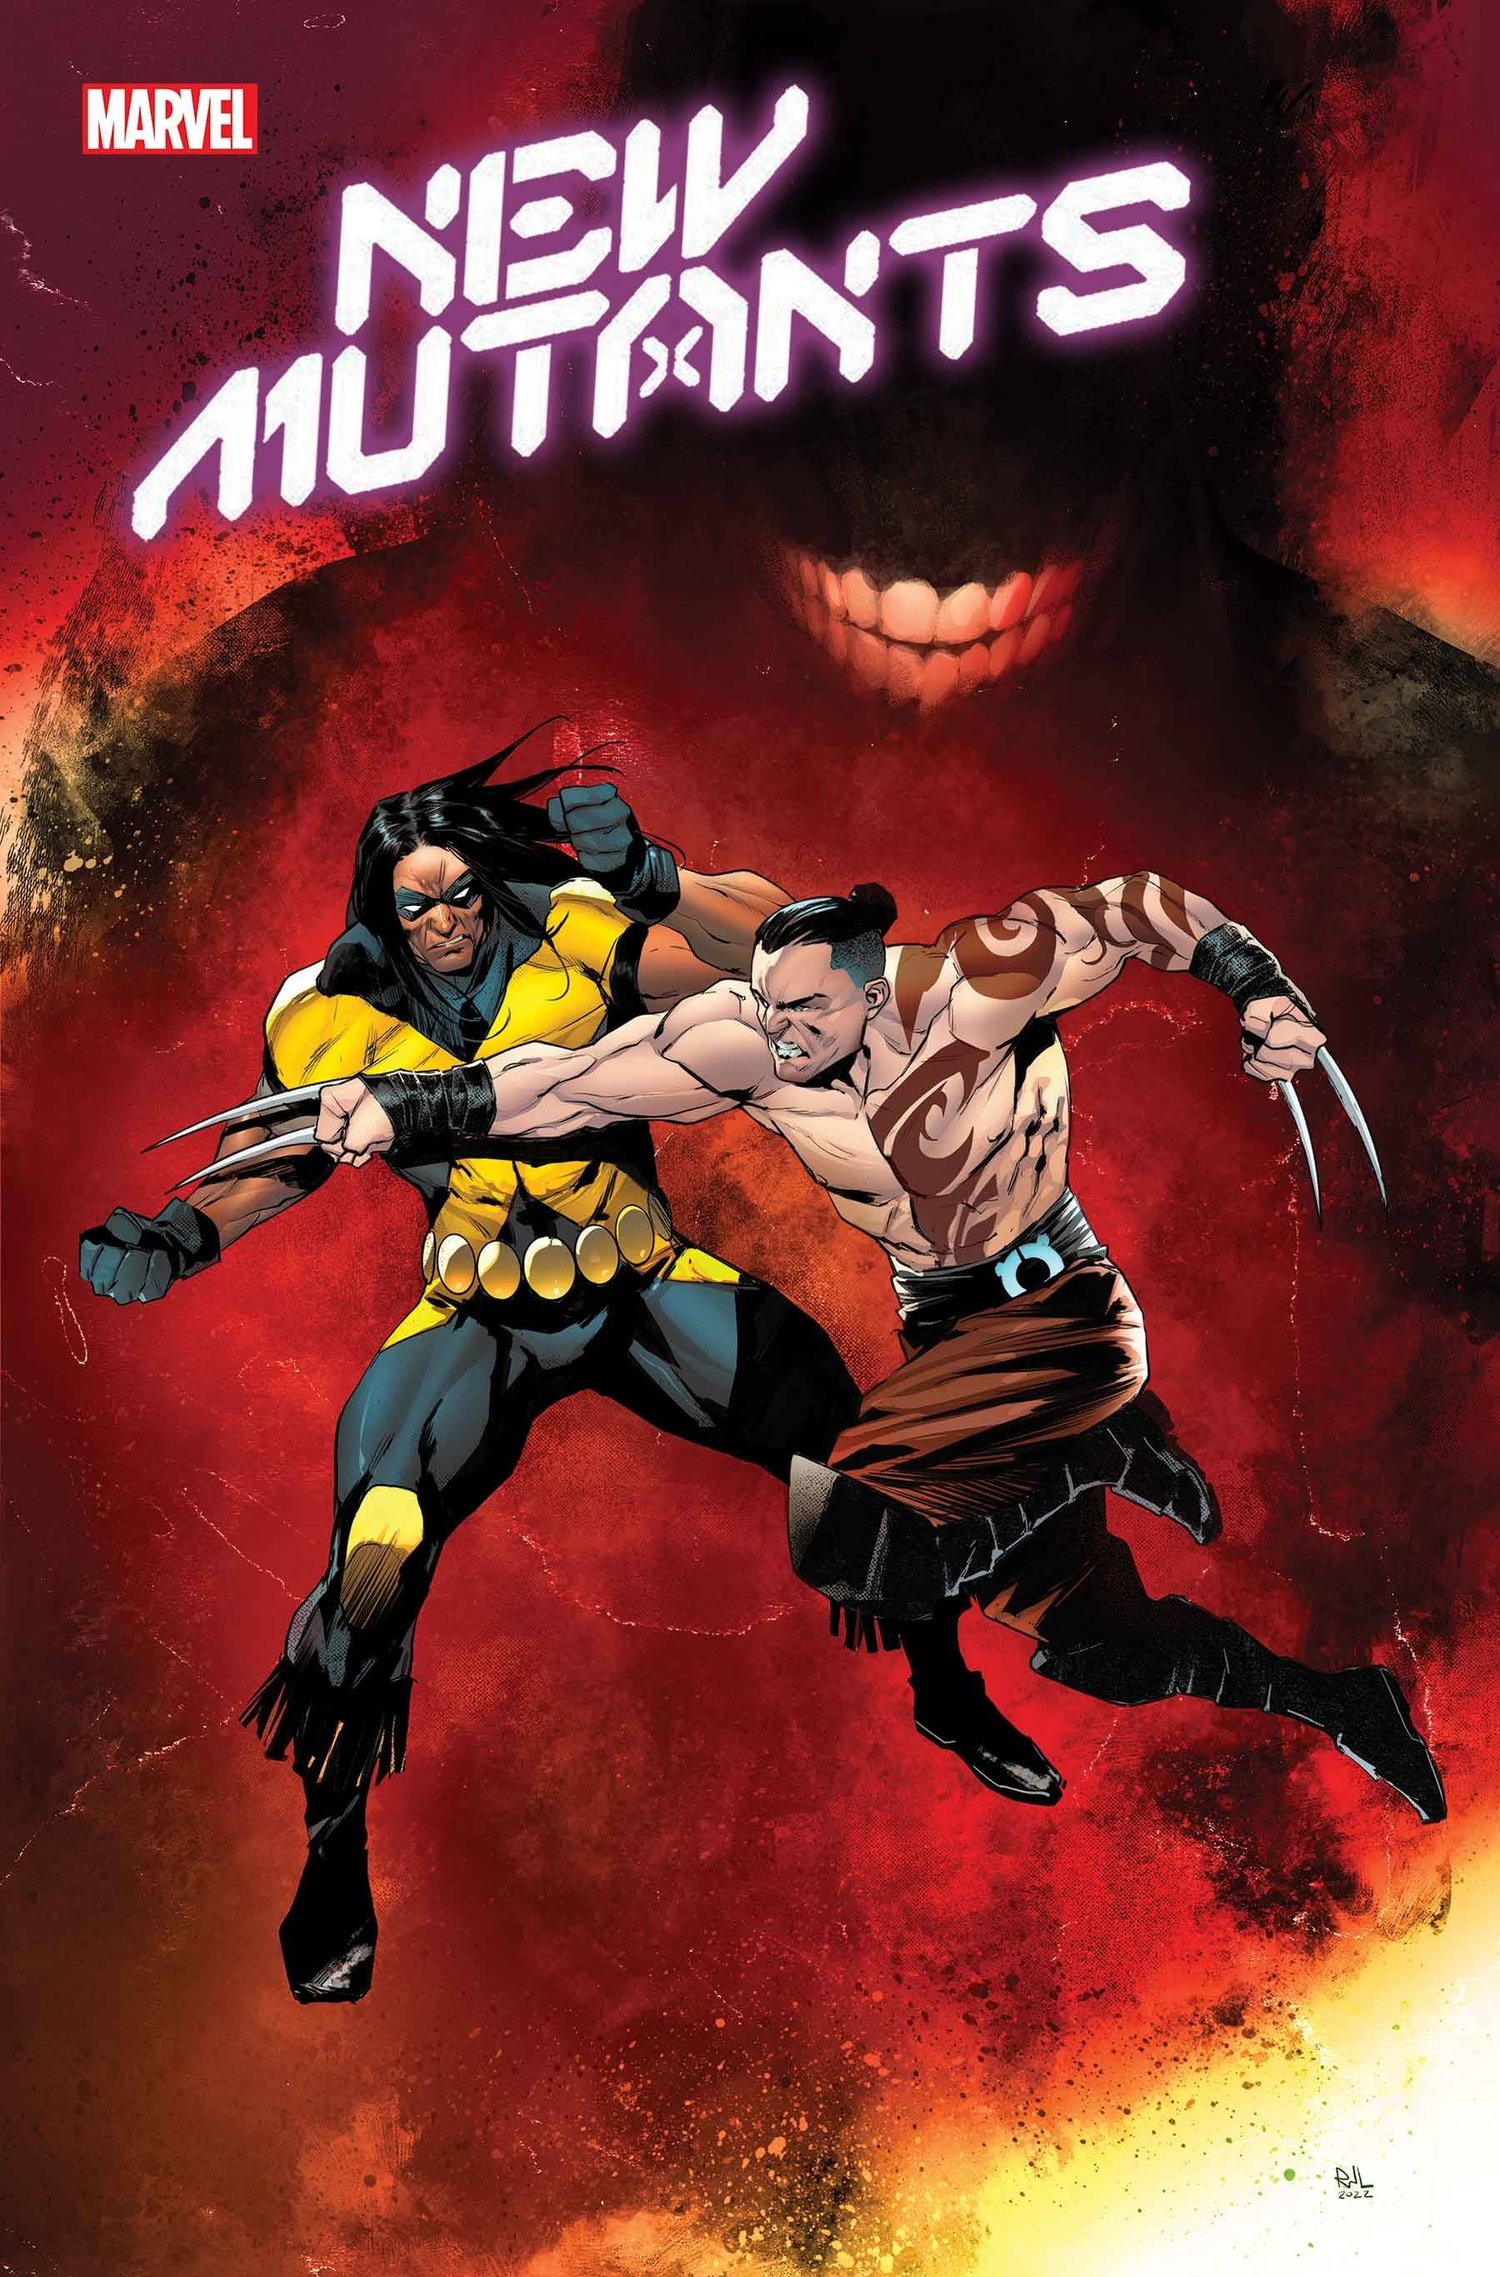 The New Mutants #2 - Sentinels (Issue)